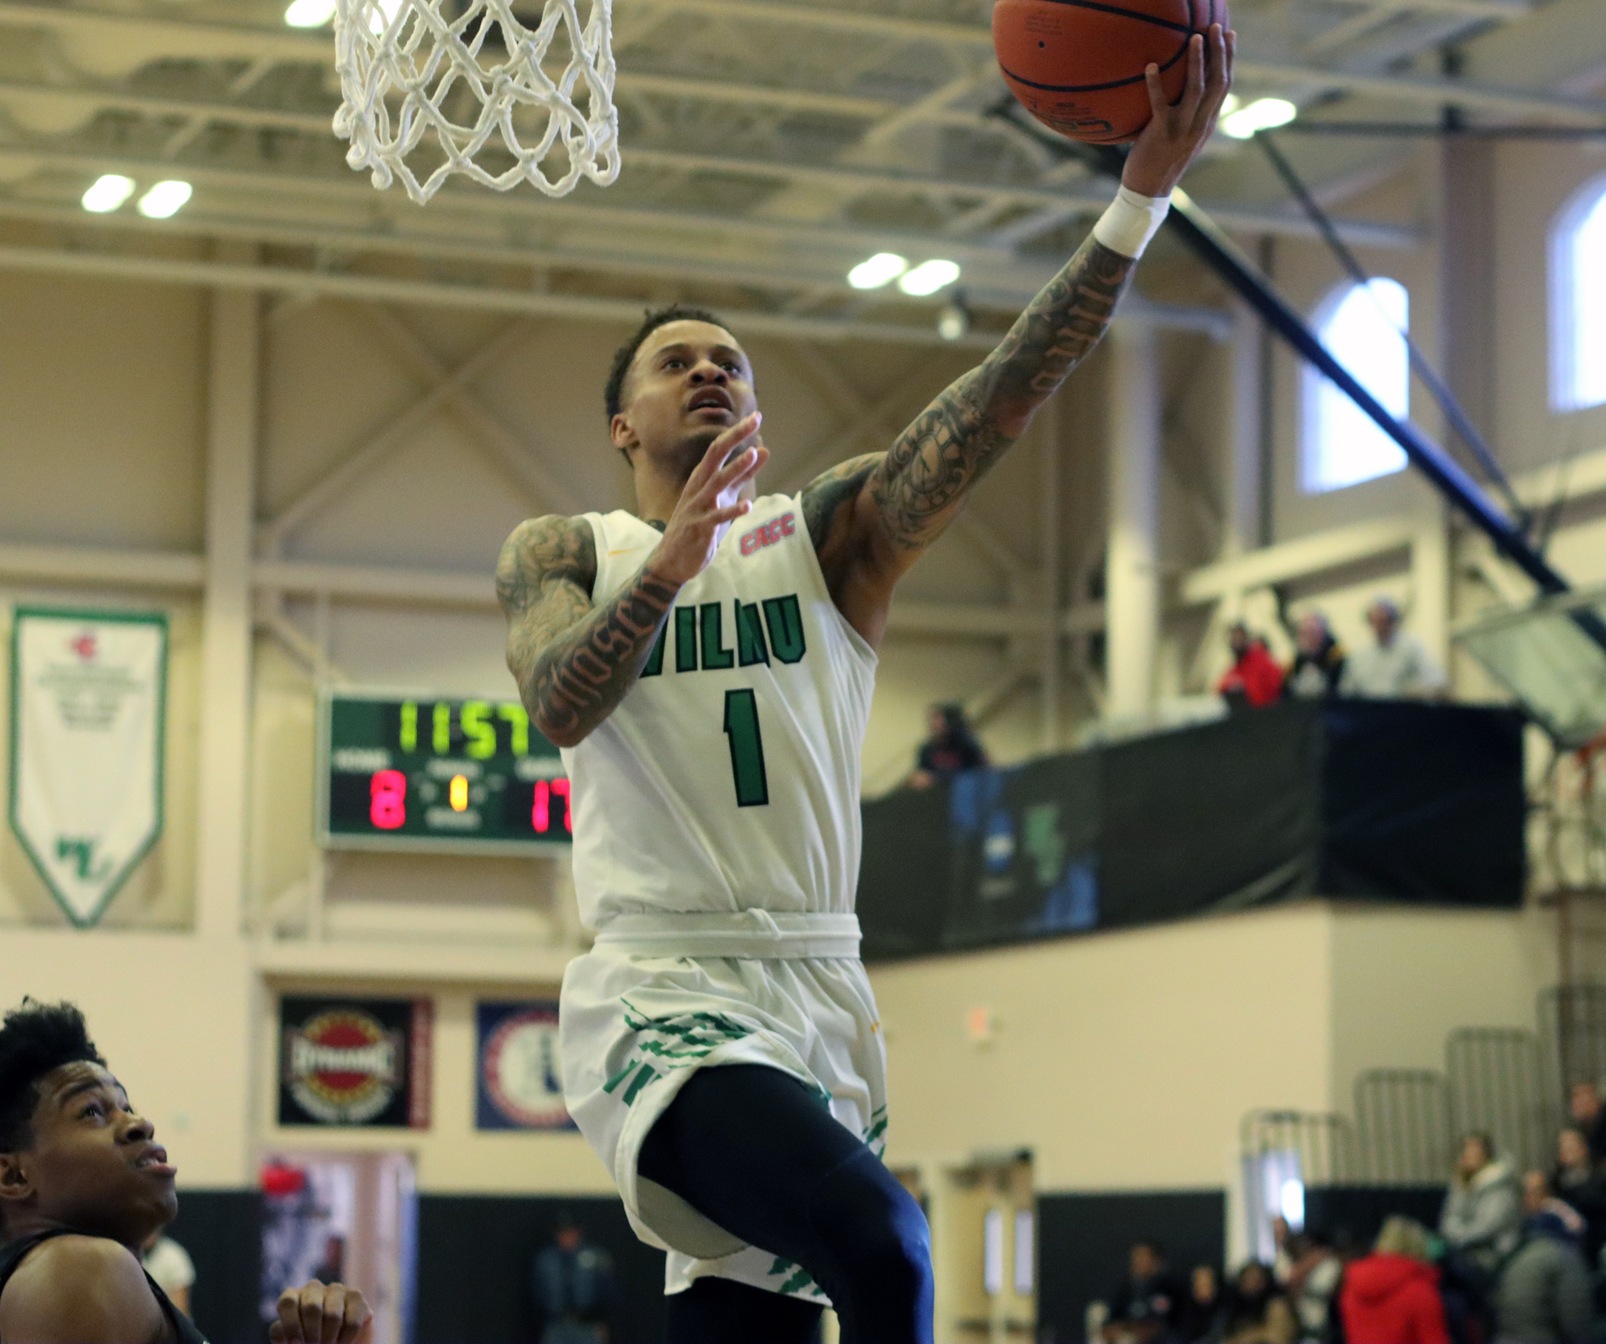 File photo of Jermaine Head who scored 26 points and is now 6 points away from tying the all-time career mark of 1,808 career points. Copyright 2020; Wilmington University. All rights reserved. Photo by Laura Gil. February 15, 2020 vs. Concordia.